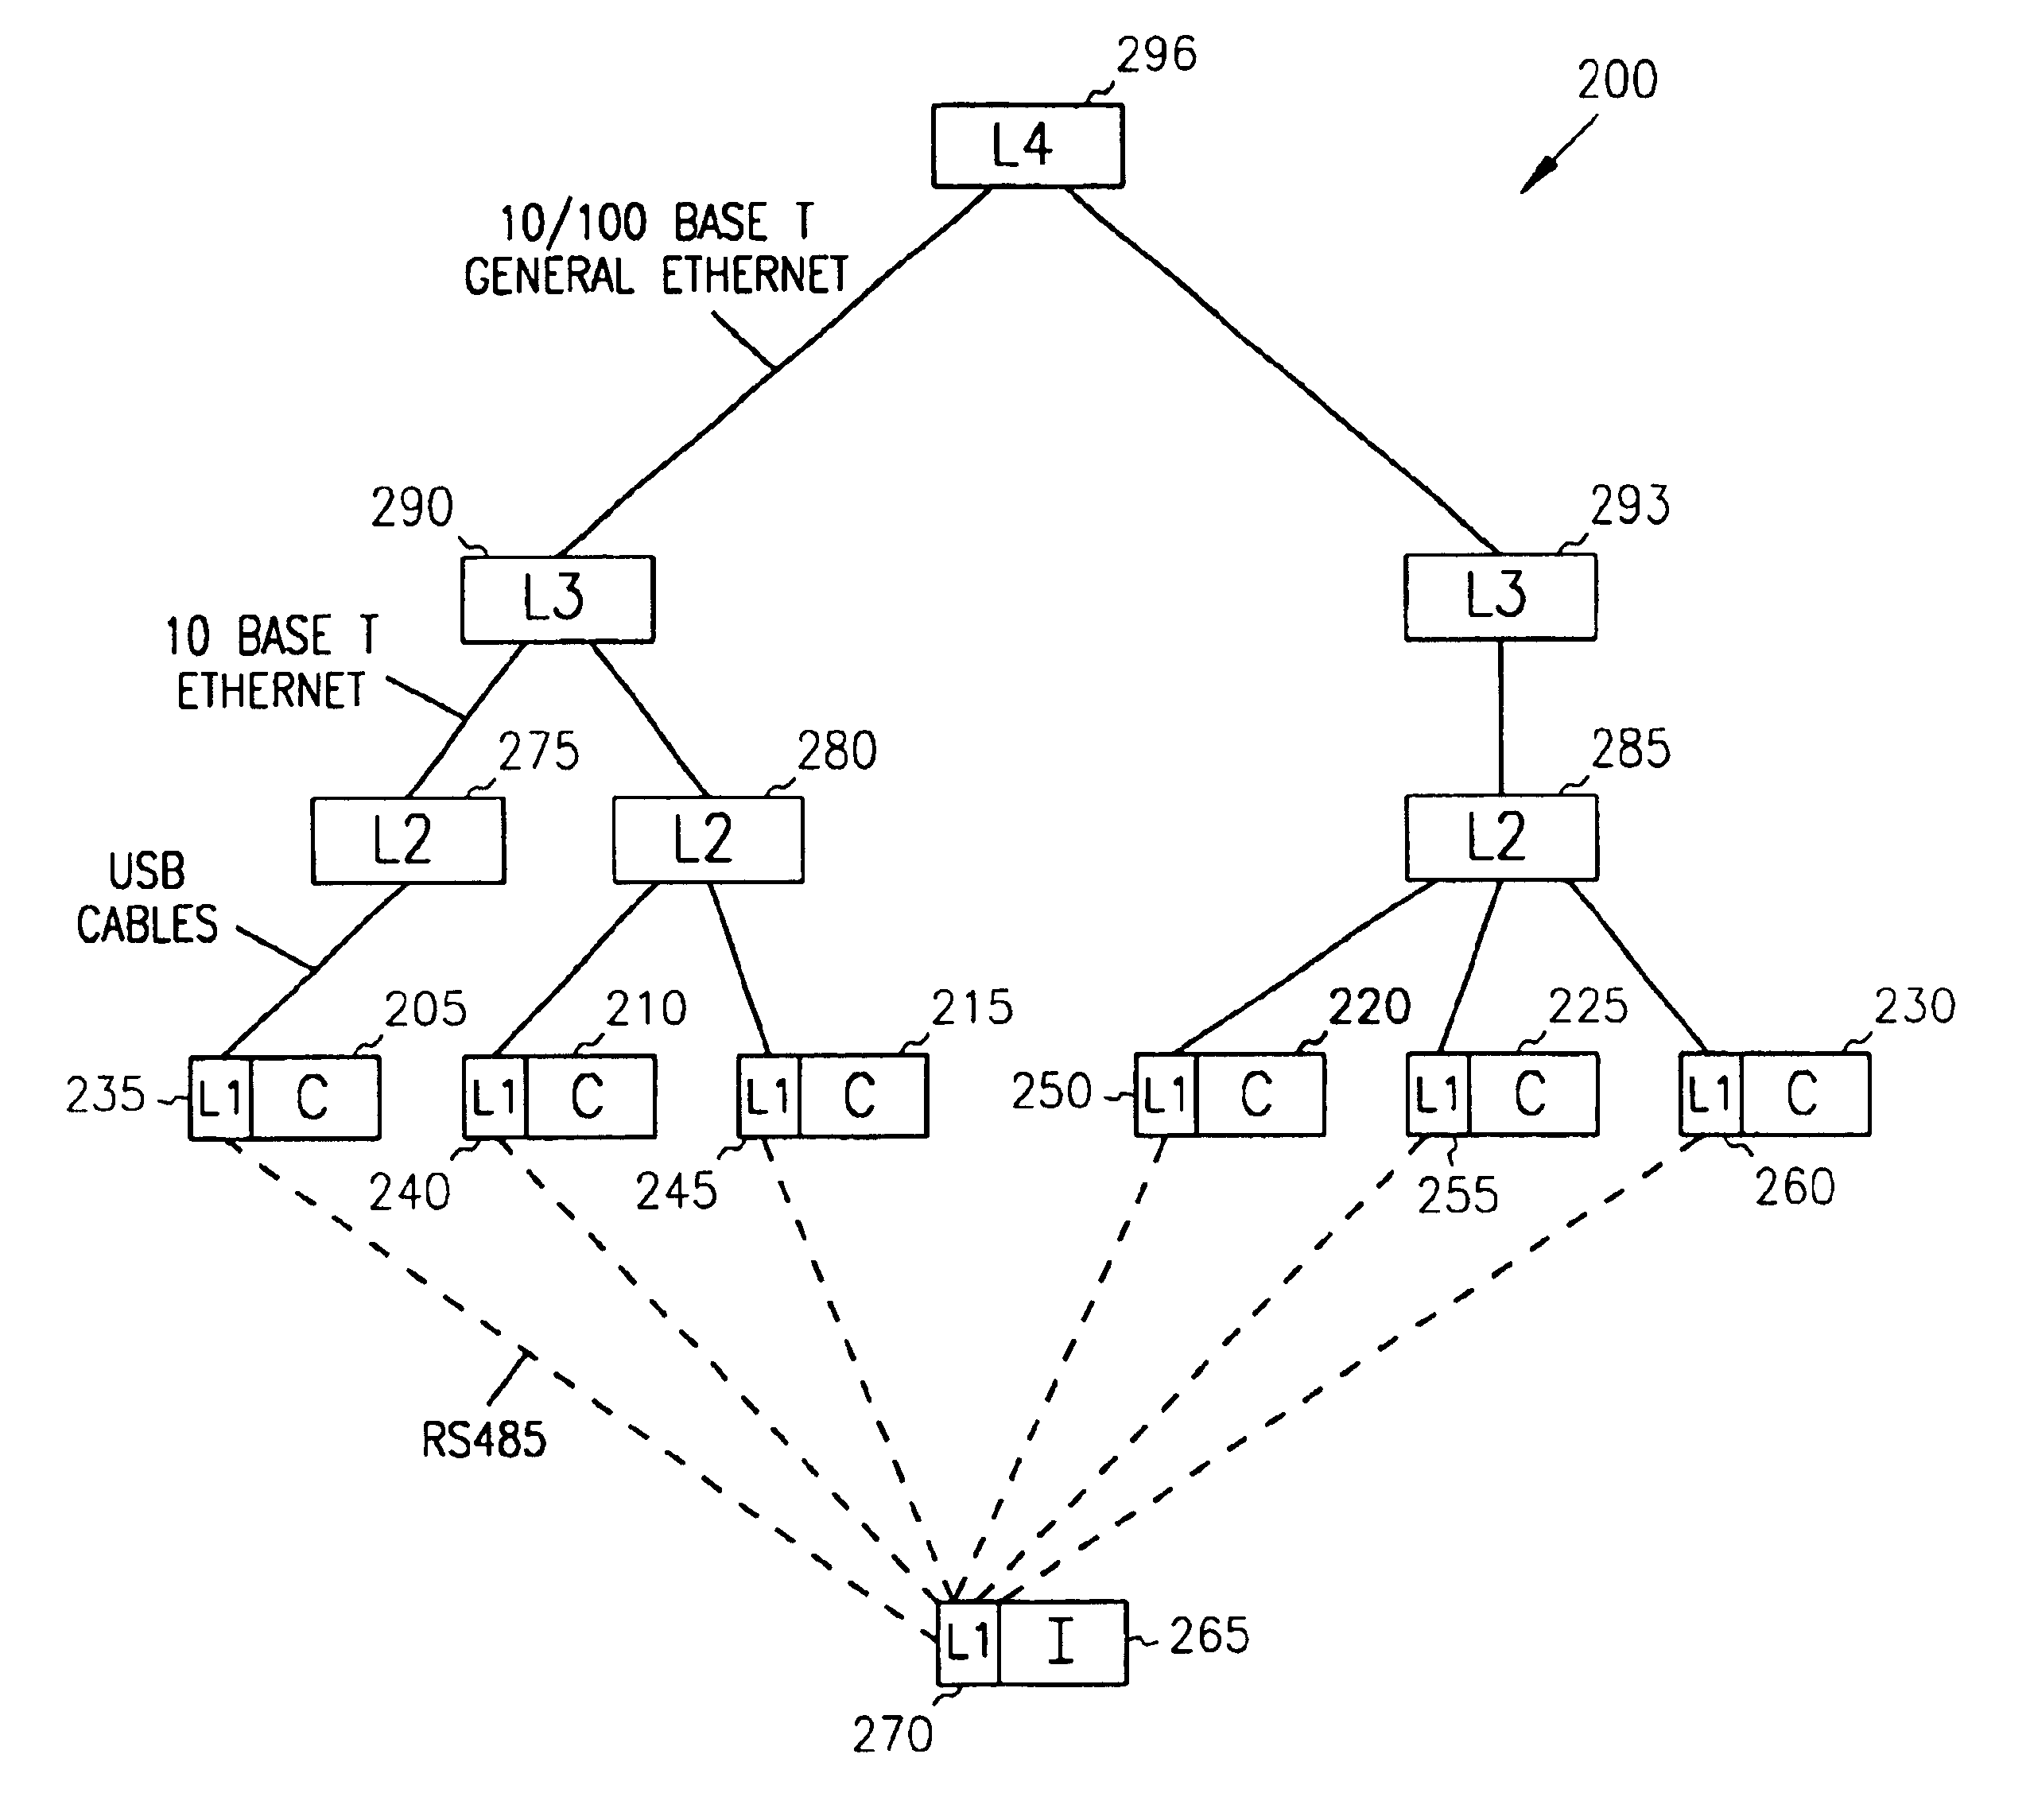 System and method for a hierarchical system management architecture of a highly scalable computing system